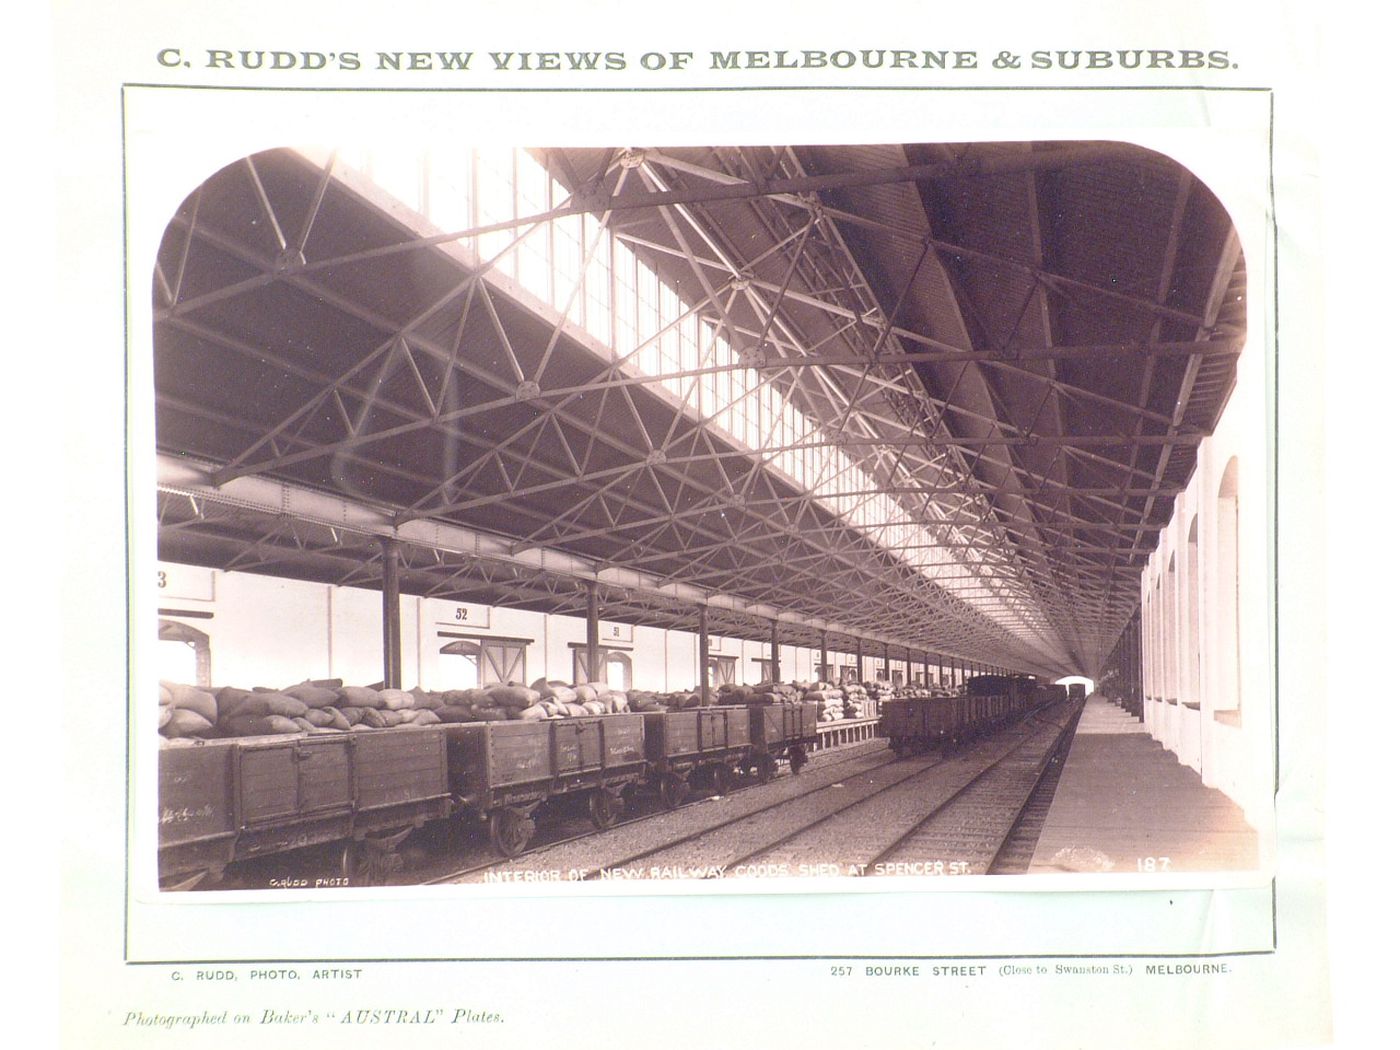 Interior view of a railway goods shed showing loaded freight cars, Spencer Street, Melbourne, Australia